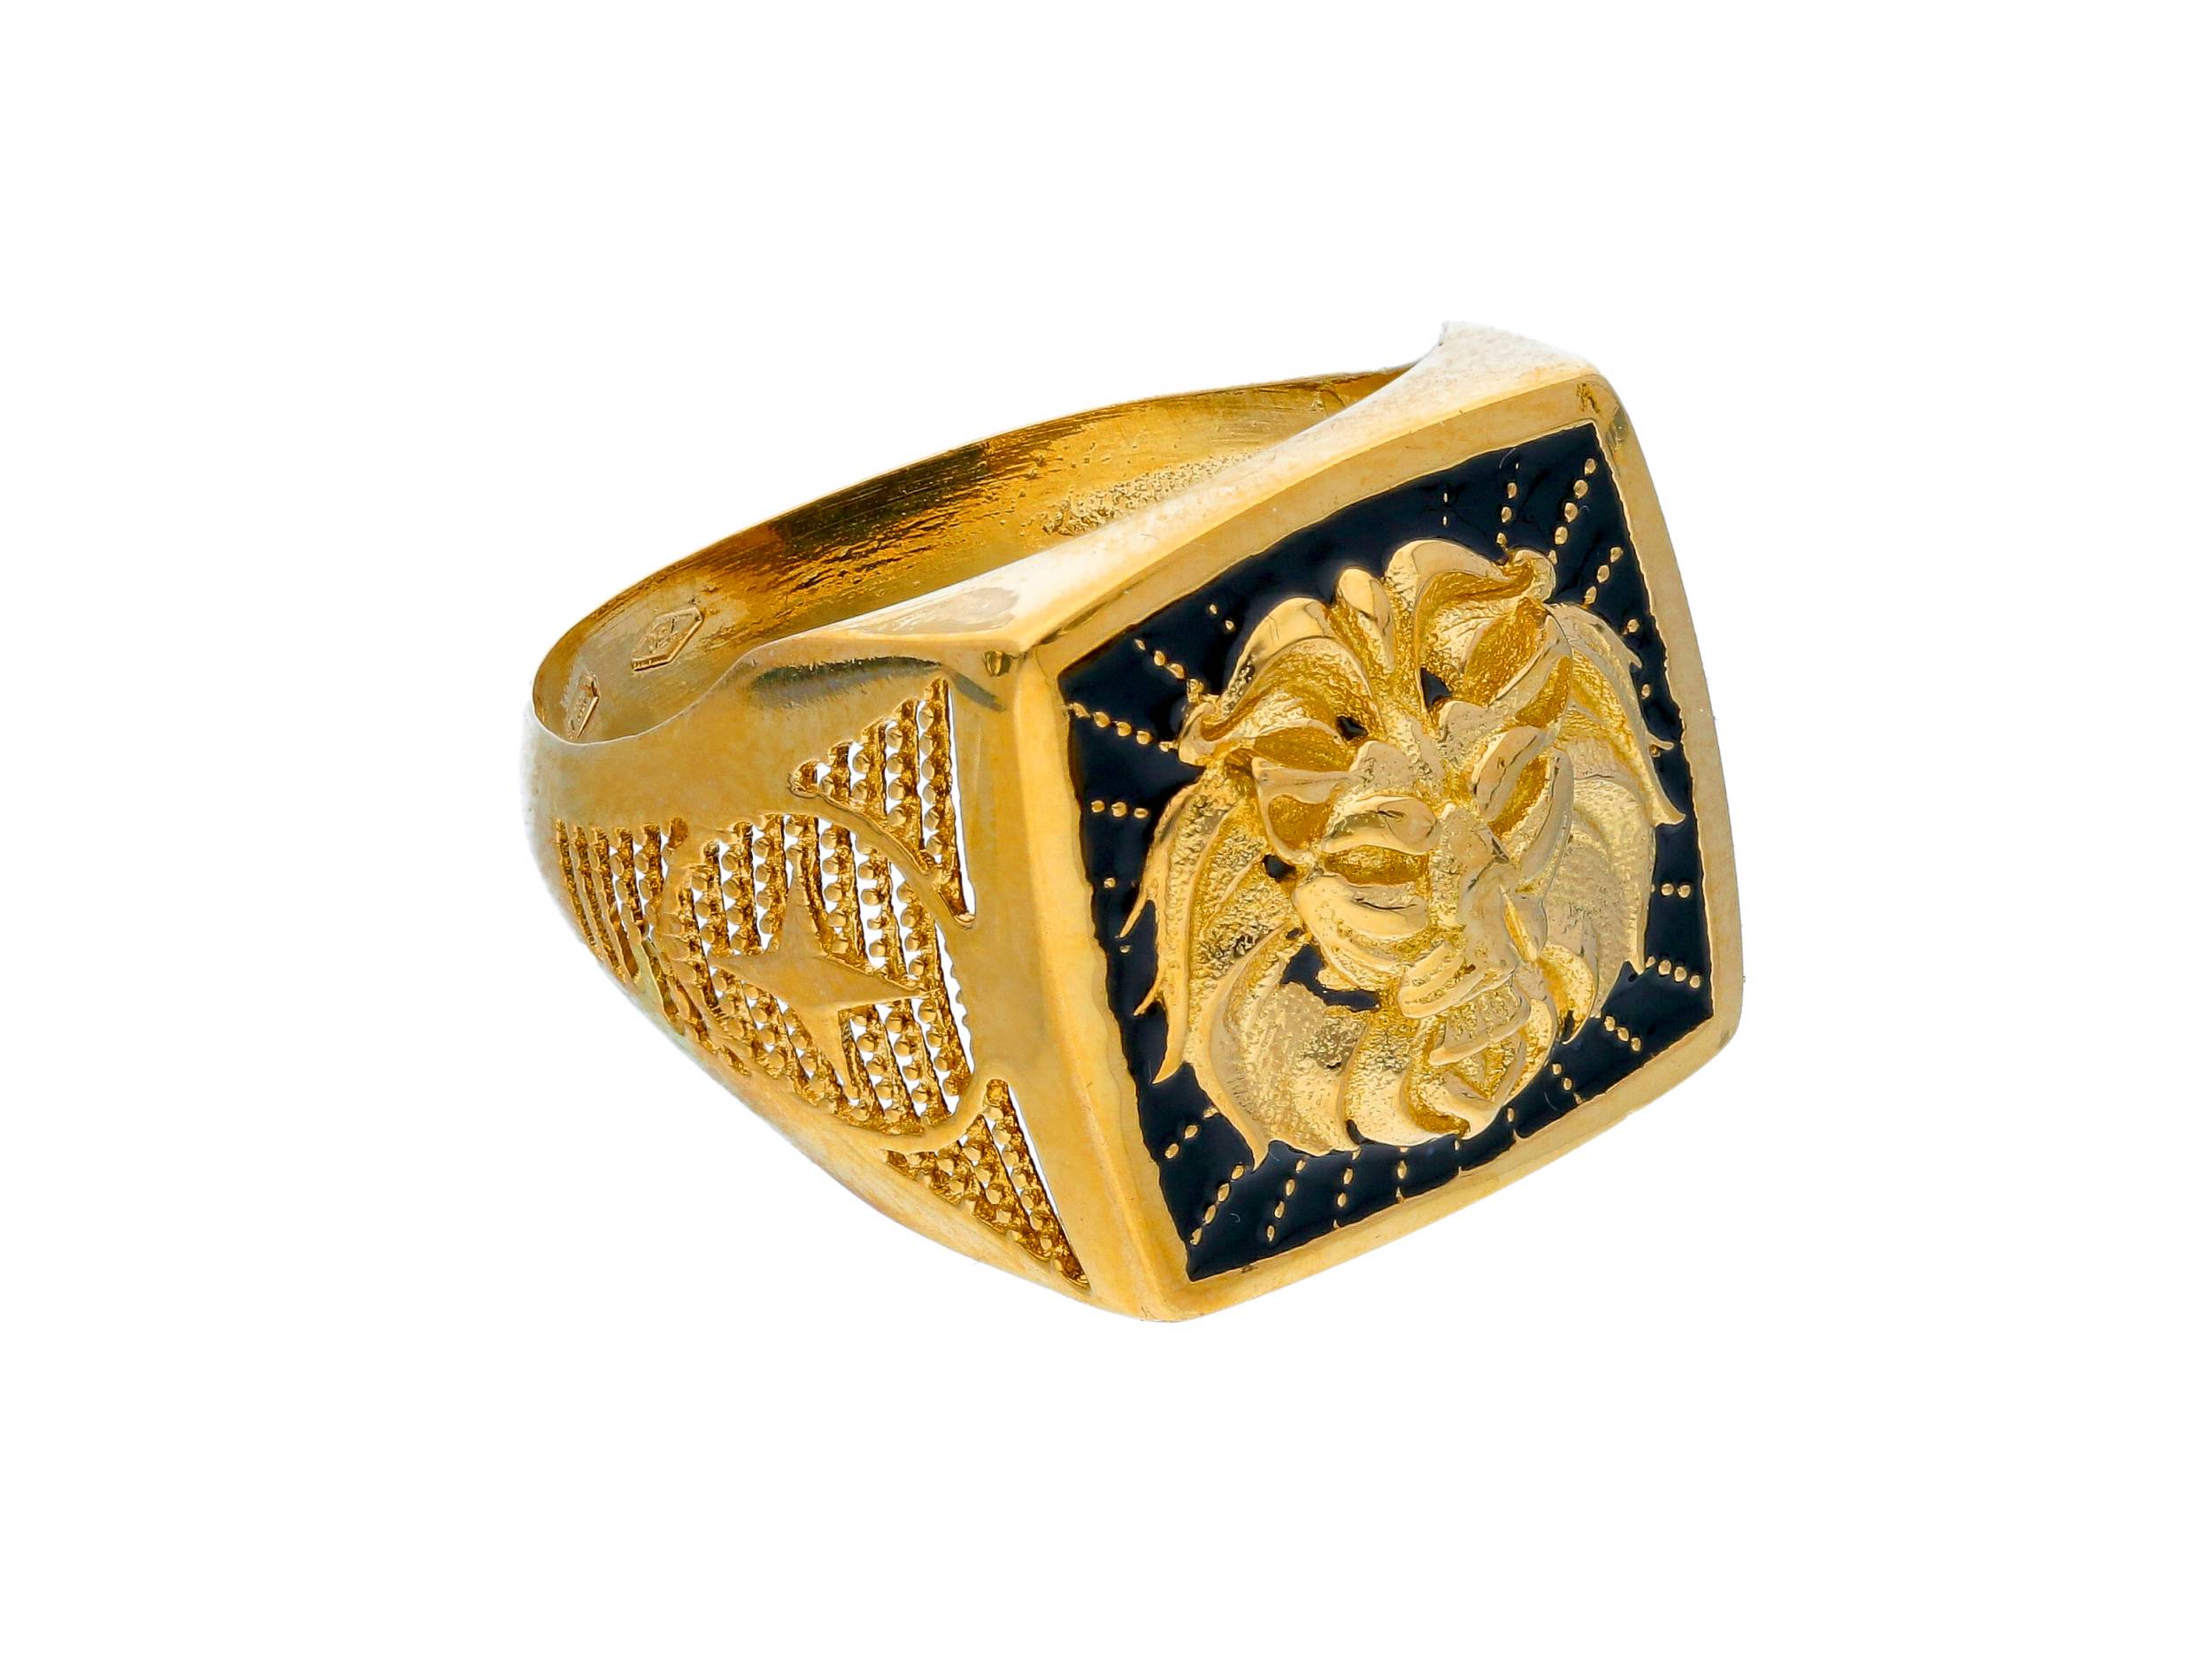 Stylish and bold 18ct Yellow gold ring with lion motif